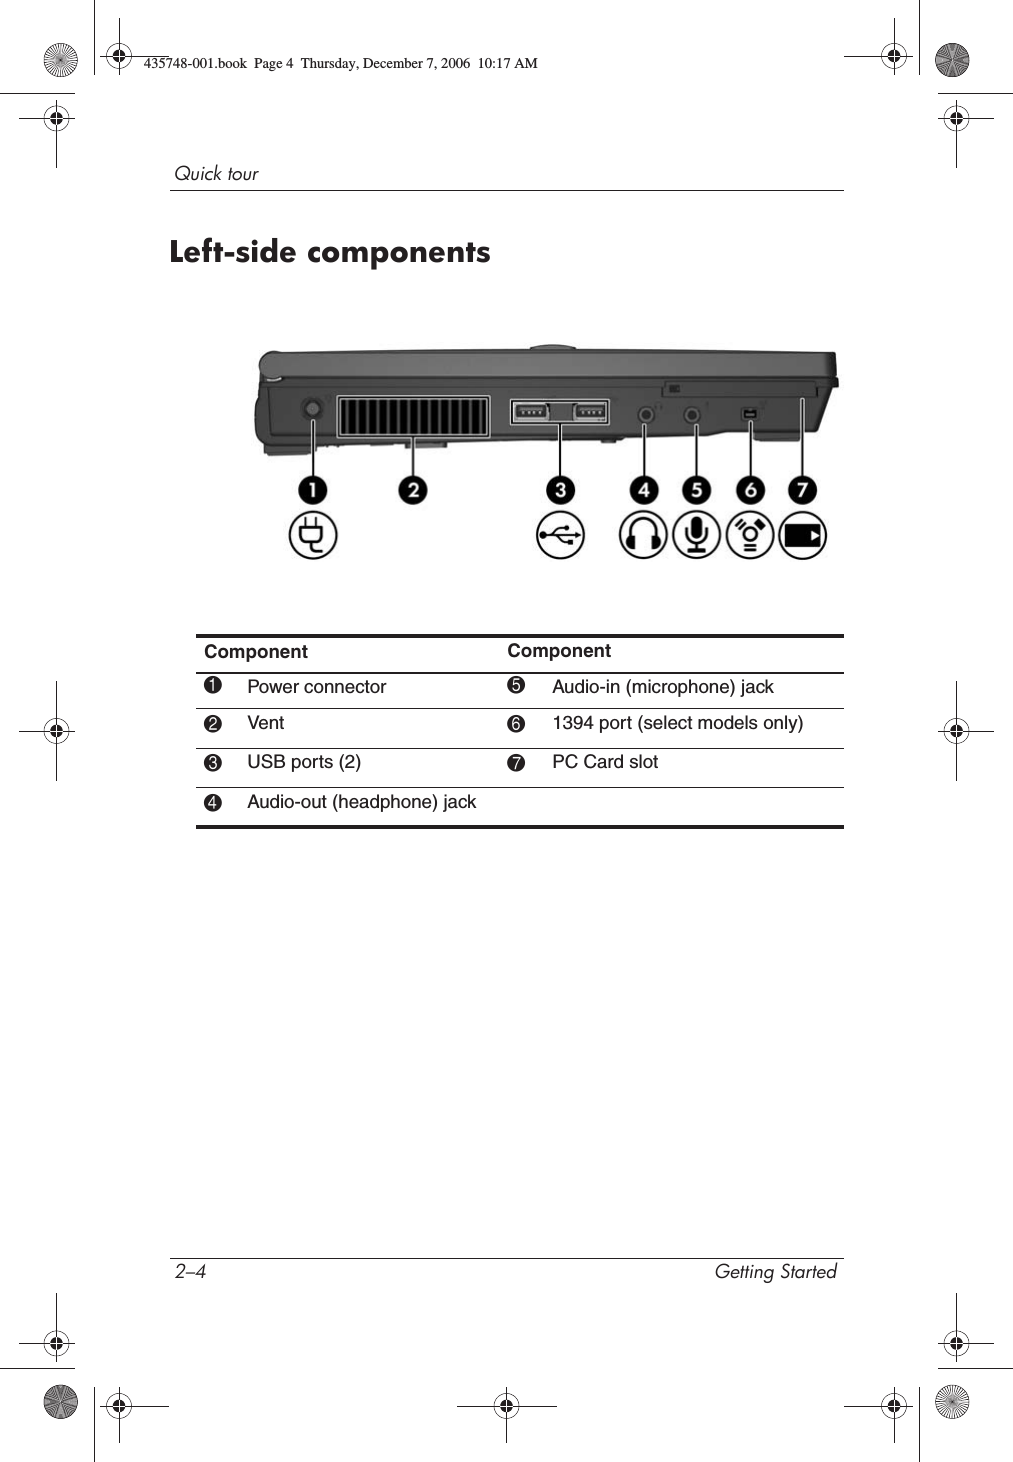 2–4 Getting StartedQuick tourLeft-side componentsComponent Component1Power connector 5Audio-in (microphone) jack2Vent 61394 port (select models only)3USB ports (2)  7PC Card slot4Audio-out (headphone) jack435748-001.book  Page 4  Thursday, December 7, 2006  10:17 AM